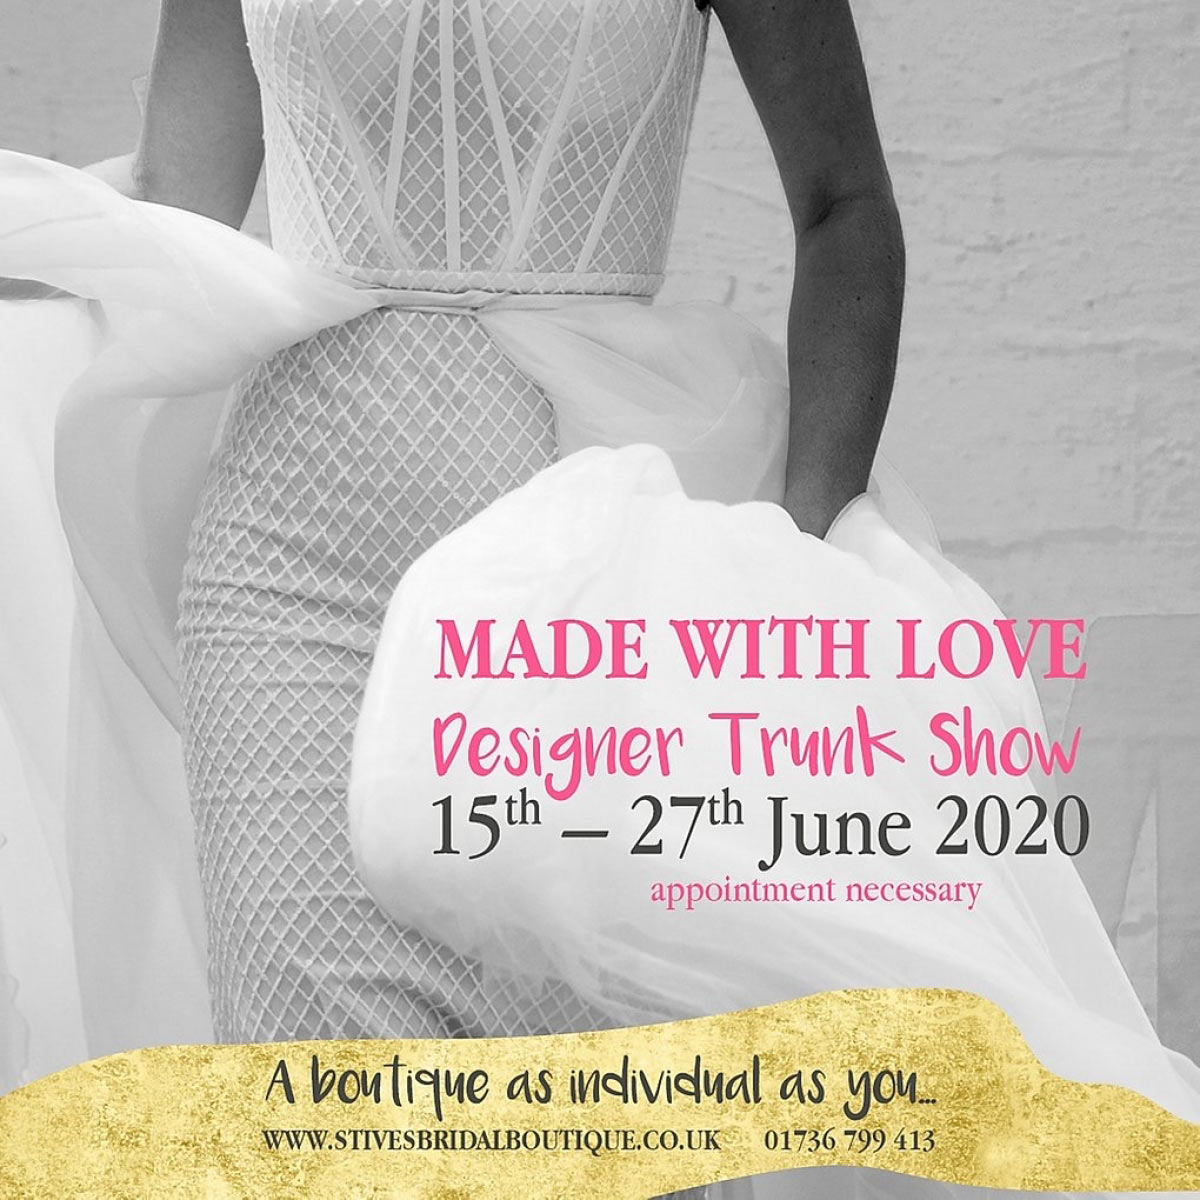 Made With Love designer trunk show at St Ives Bridal Boutique